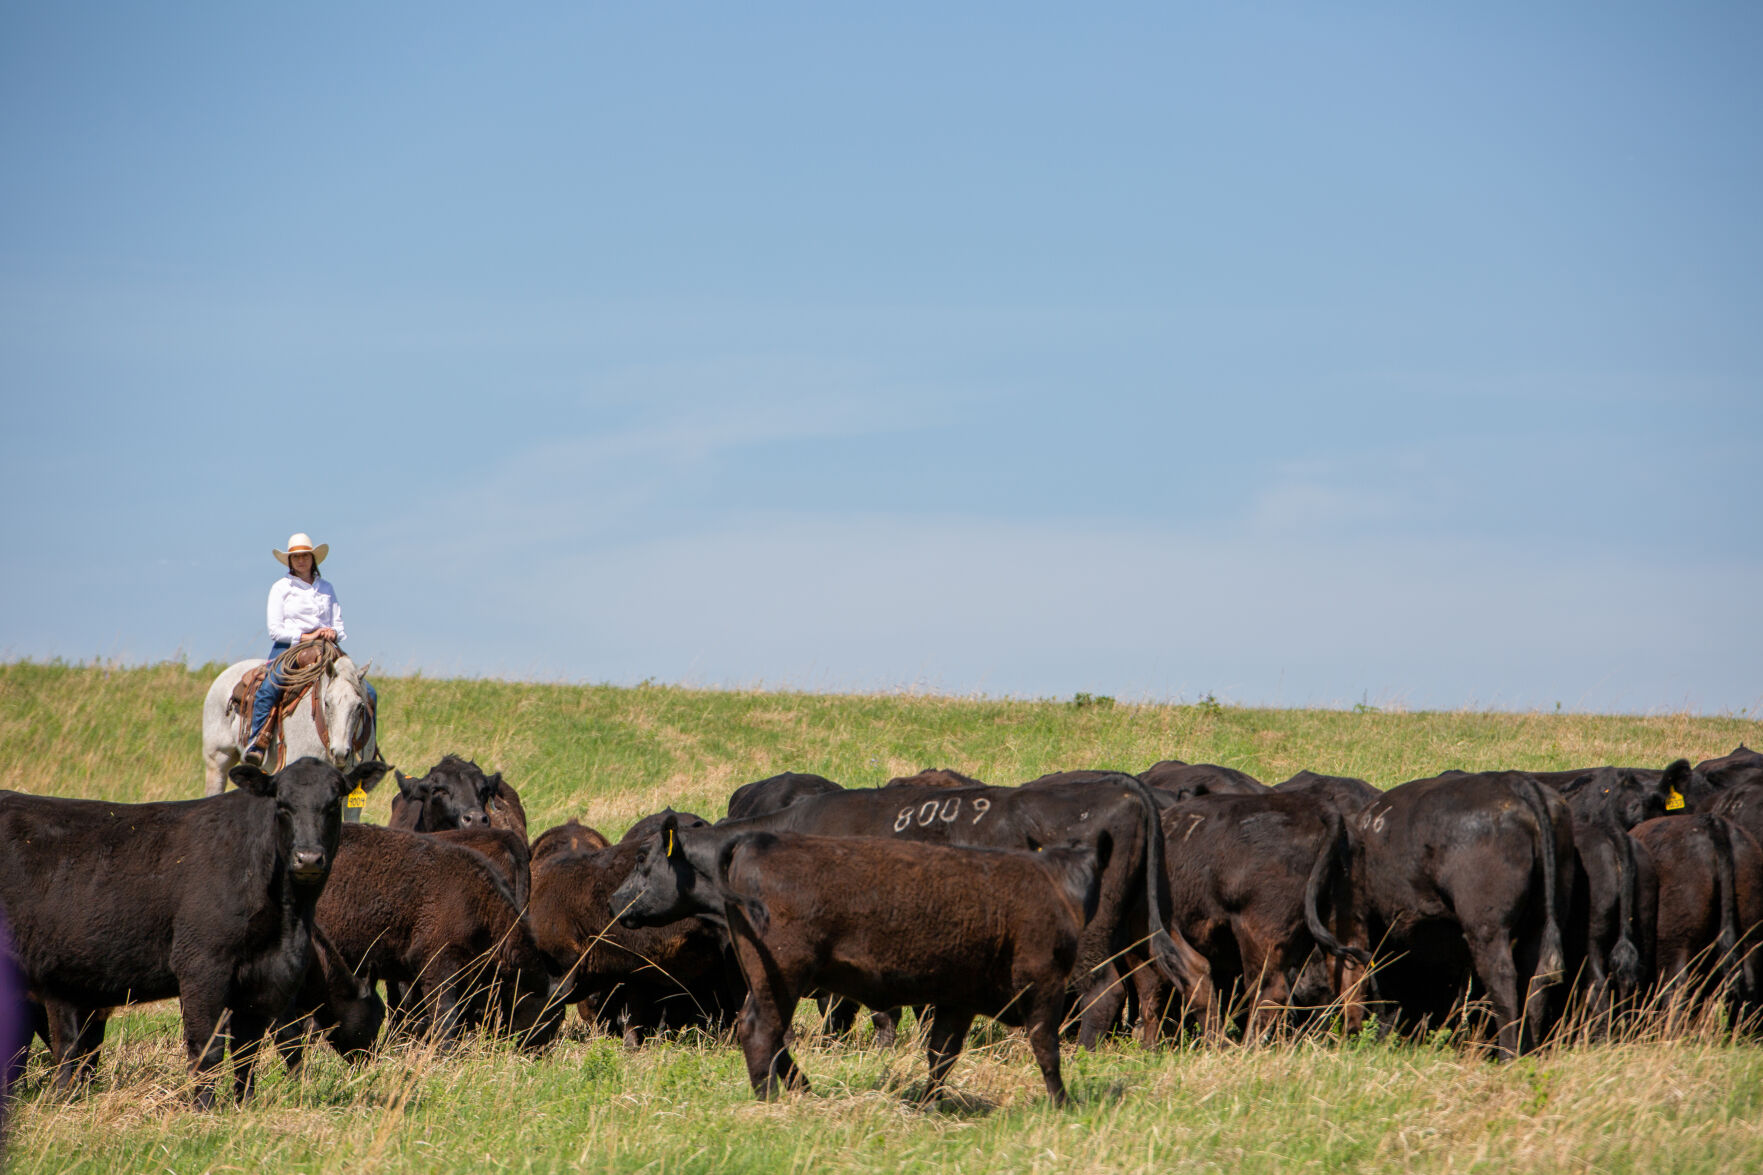 Amy Langvardt minds the cattle at the May Beef Month proclaimation event May 12 near Manhattan, Kansas. Lyons Ranch hosted the event where Kansas Governor Laura Kelly signed the proclamation. (Journal photo by Kylene Scott.)